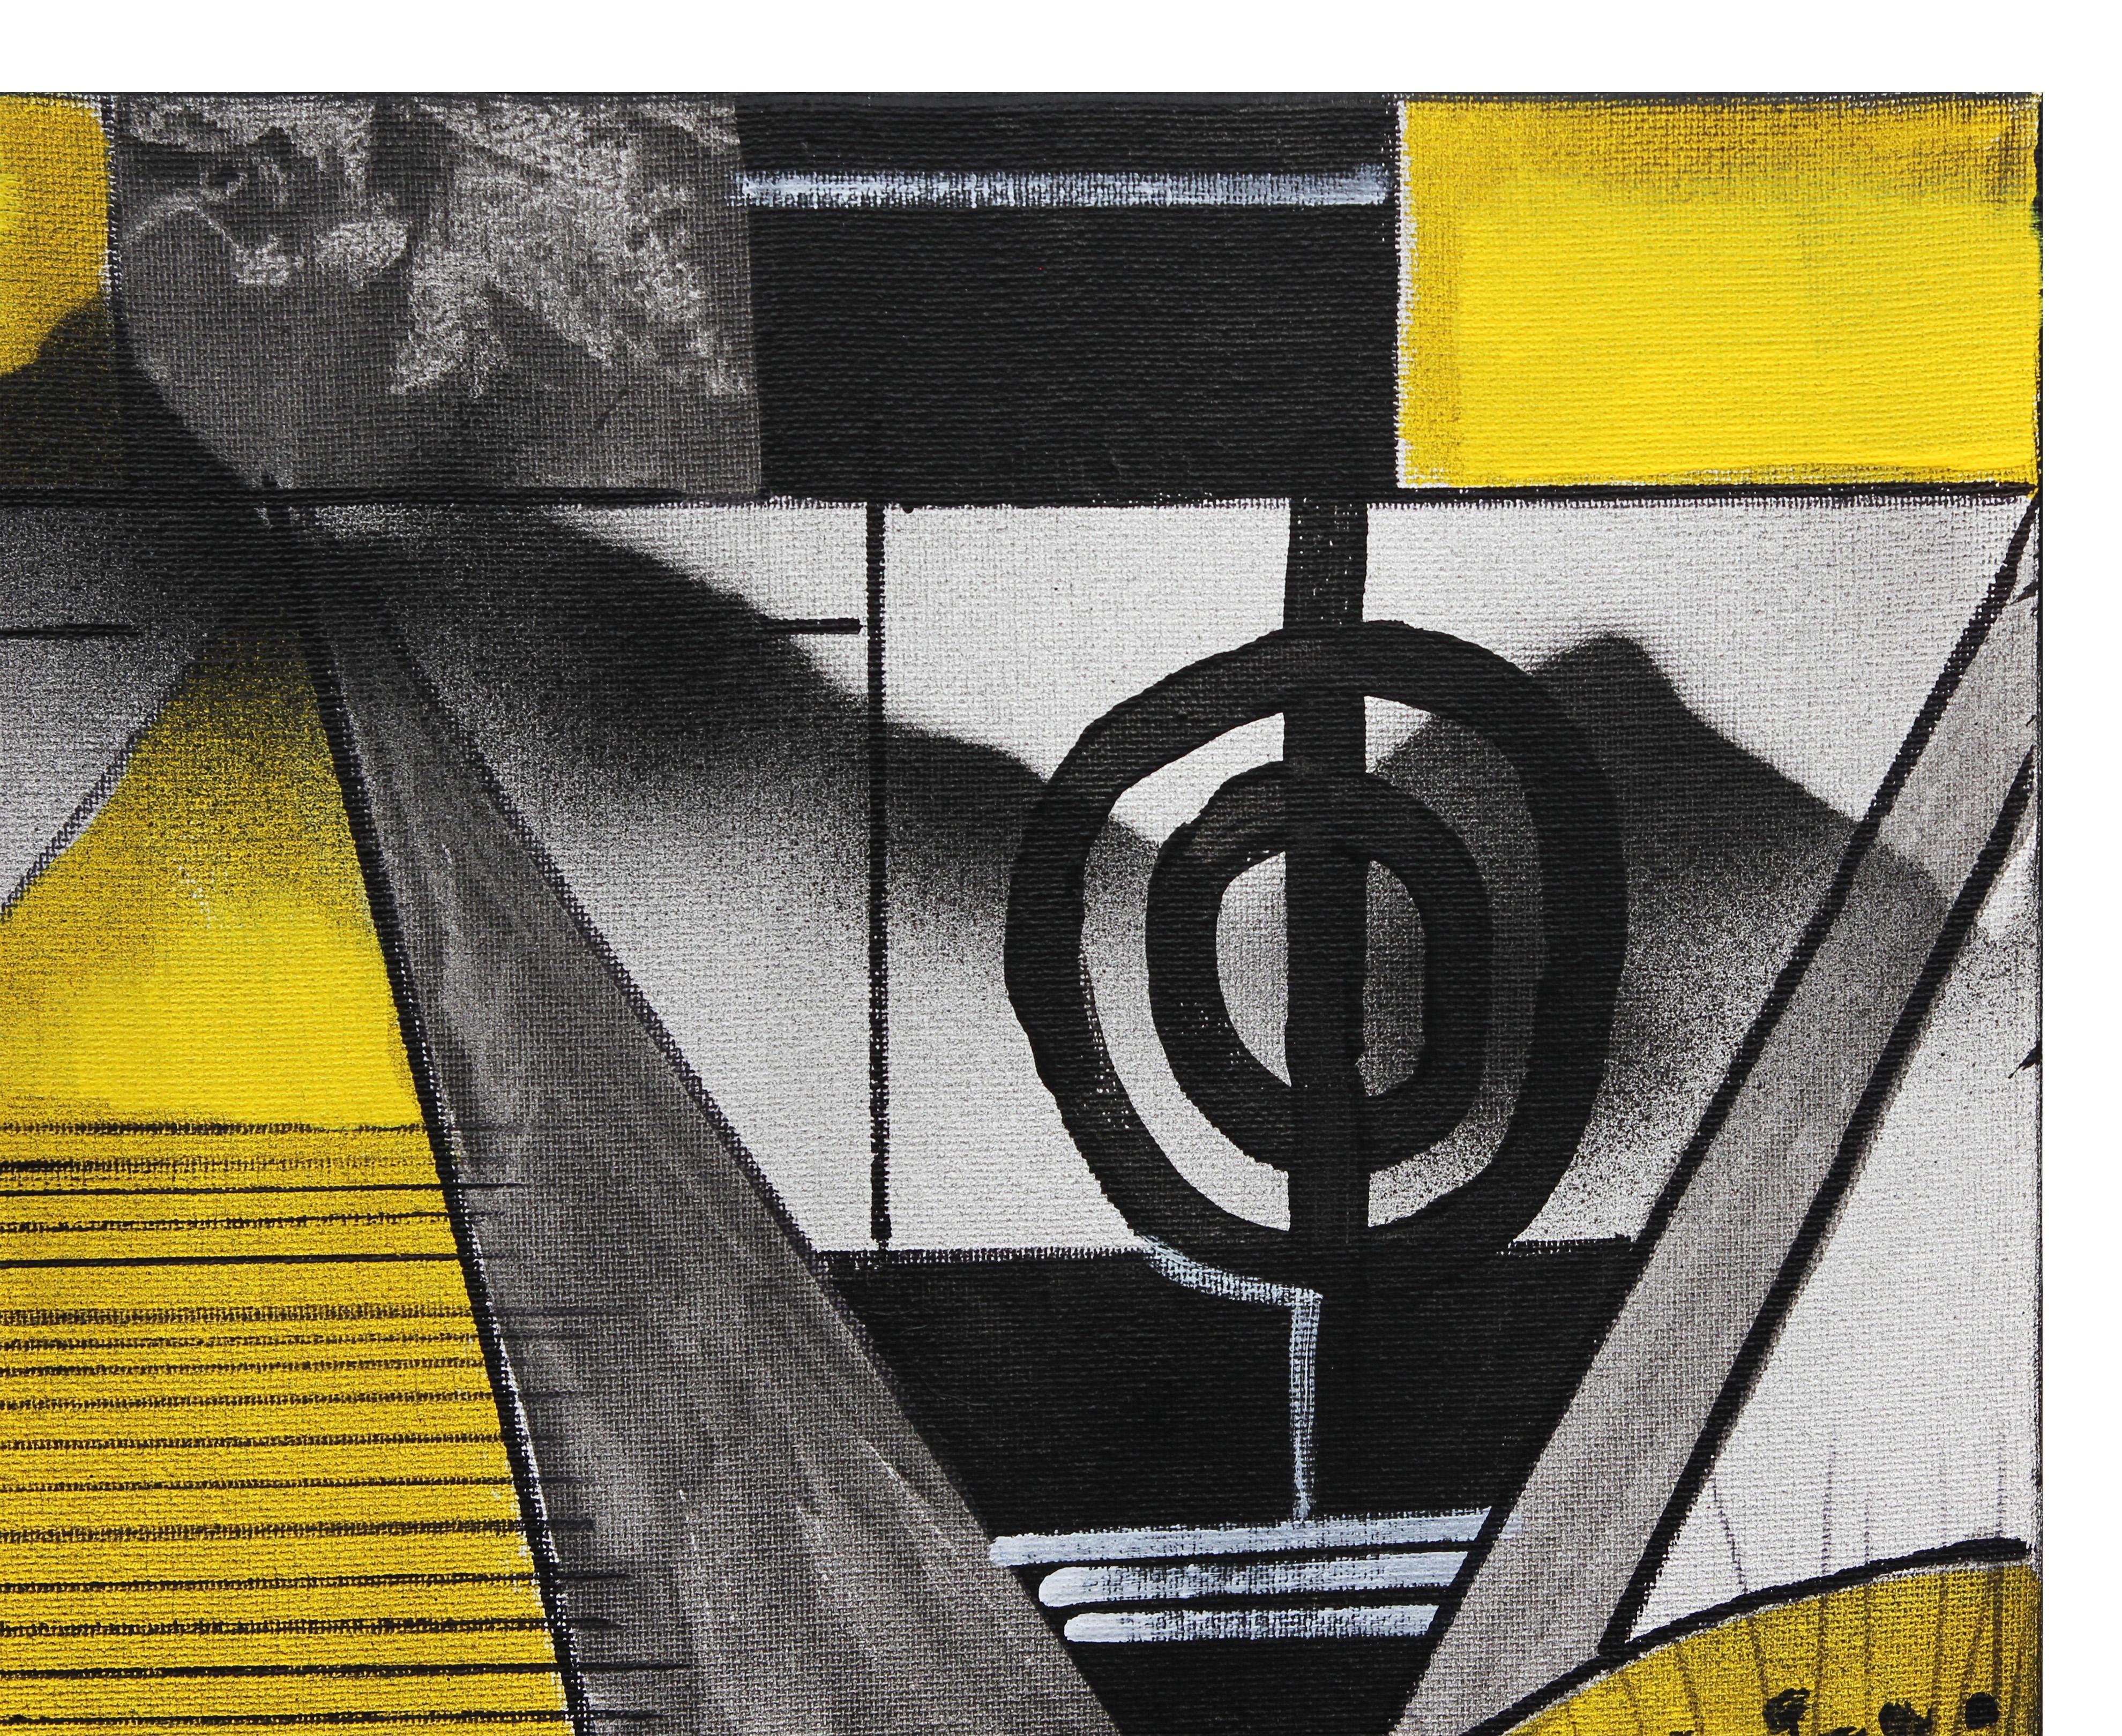 Contemporary black, yellow, and gray geometric abstract painting by Houston, TX artist Larry Martin. The work features a balanced composition of floating circles and triangles. Signed and dated on reverse. Currently unframed, but options are